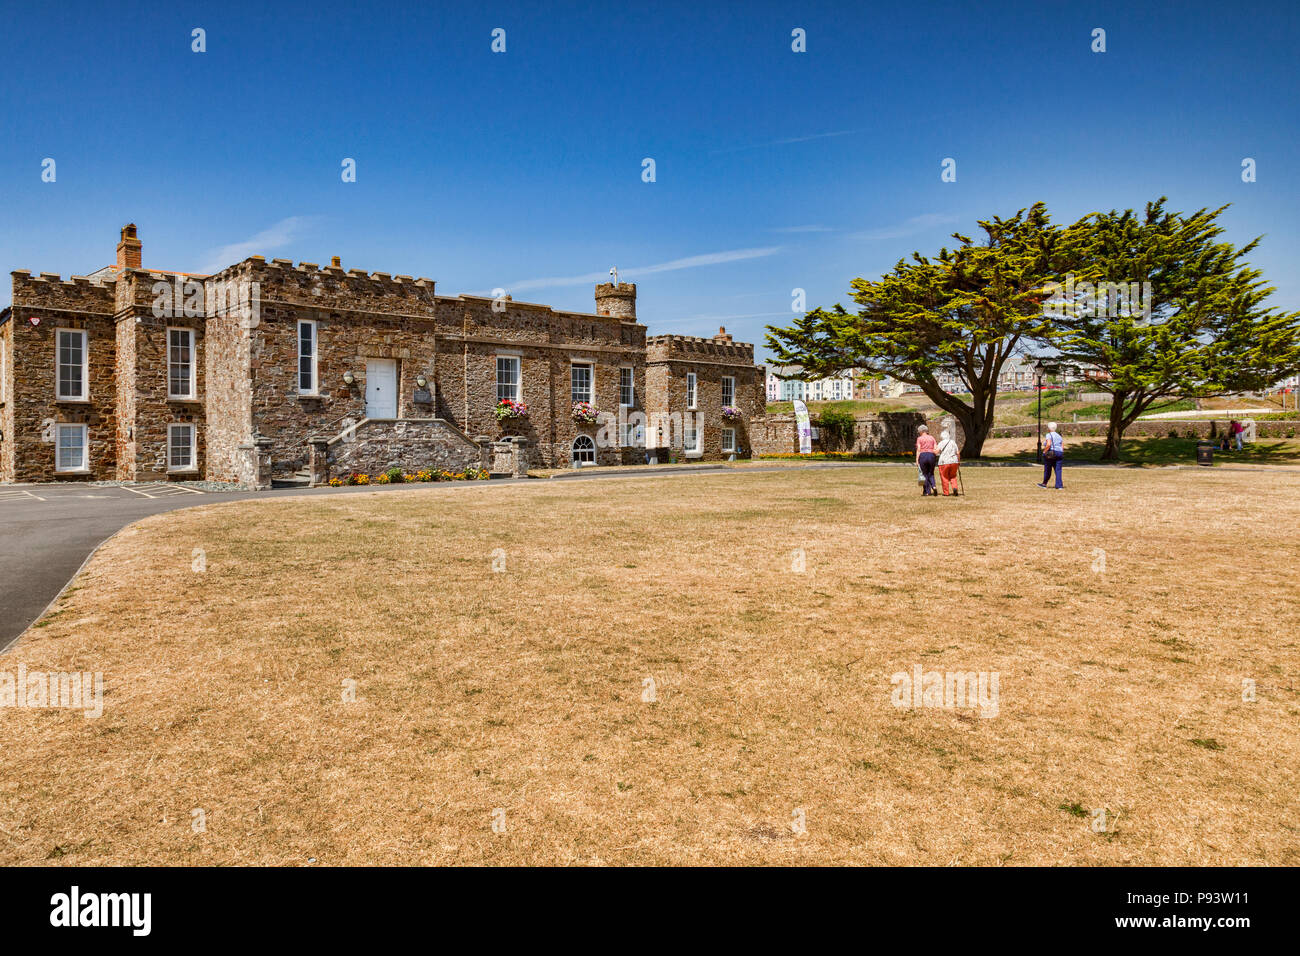 6 July 2018: Bude, Cornwall, UK - Bude Castle, a museum and heritage centre. In front is the drought stricken lawn, completely brown during the July h Stock Photo